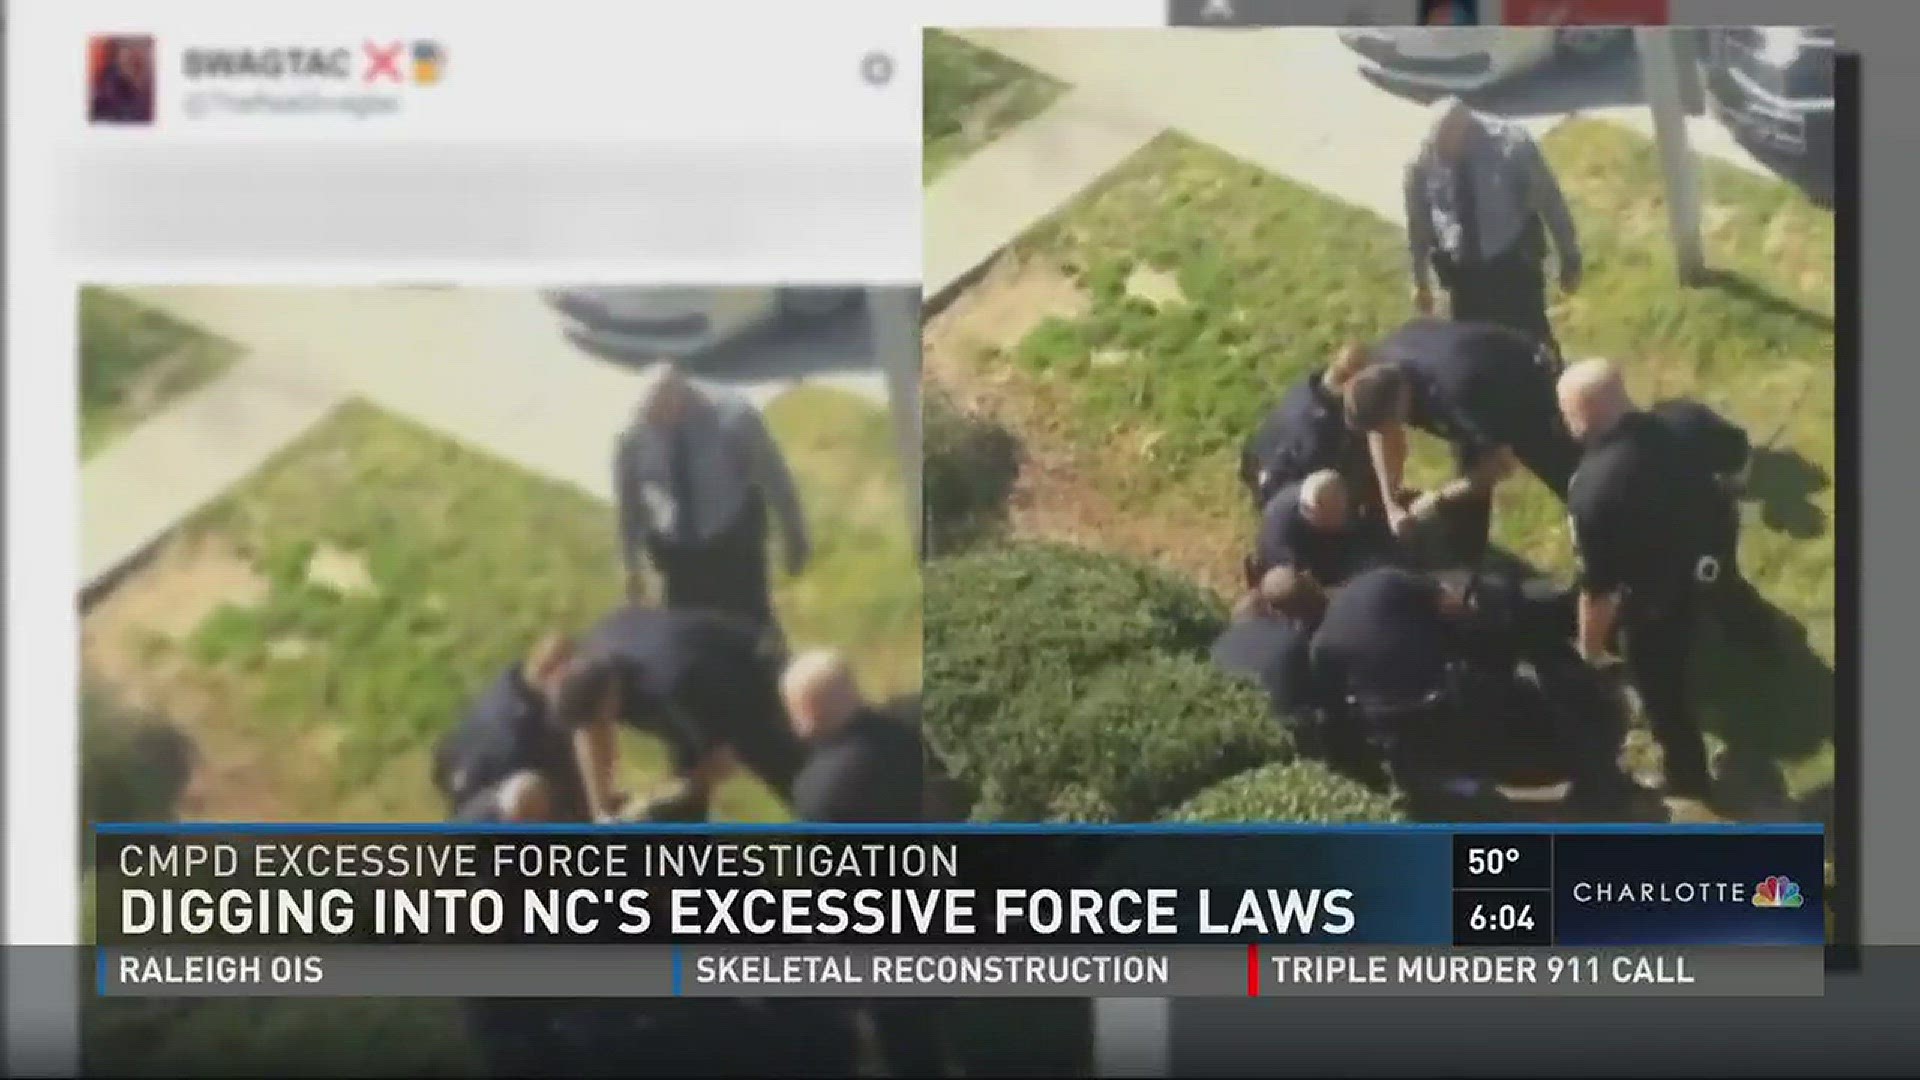 A video appearing to show CMPD officers punching a suspect has triggered an investigation regarding excessive use of force by officers.